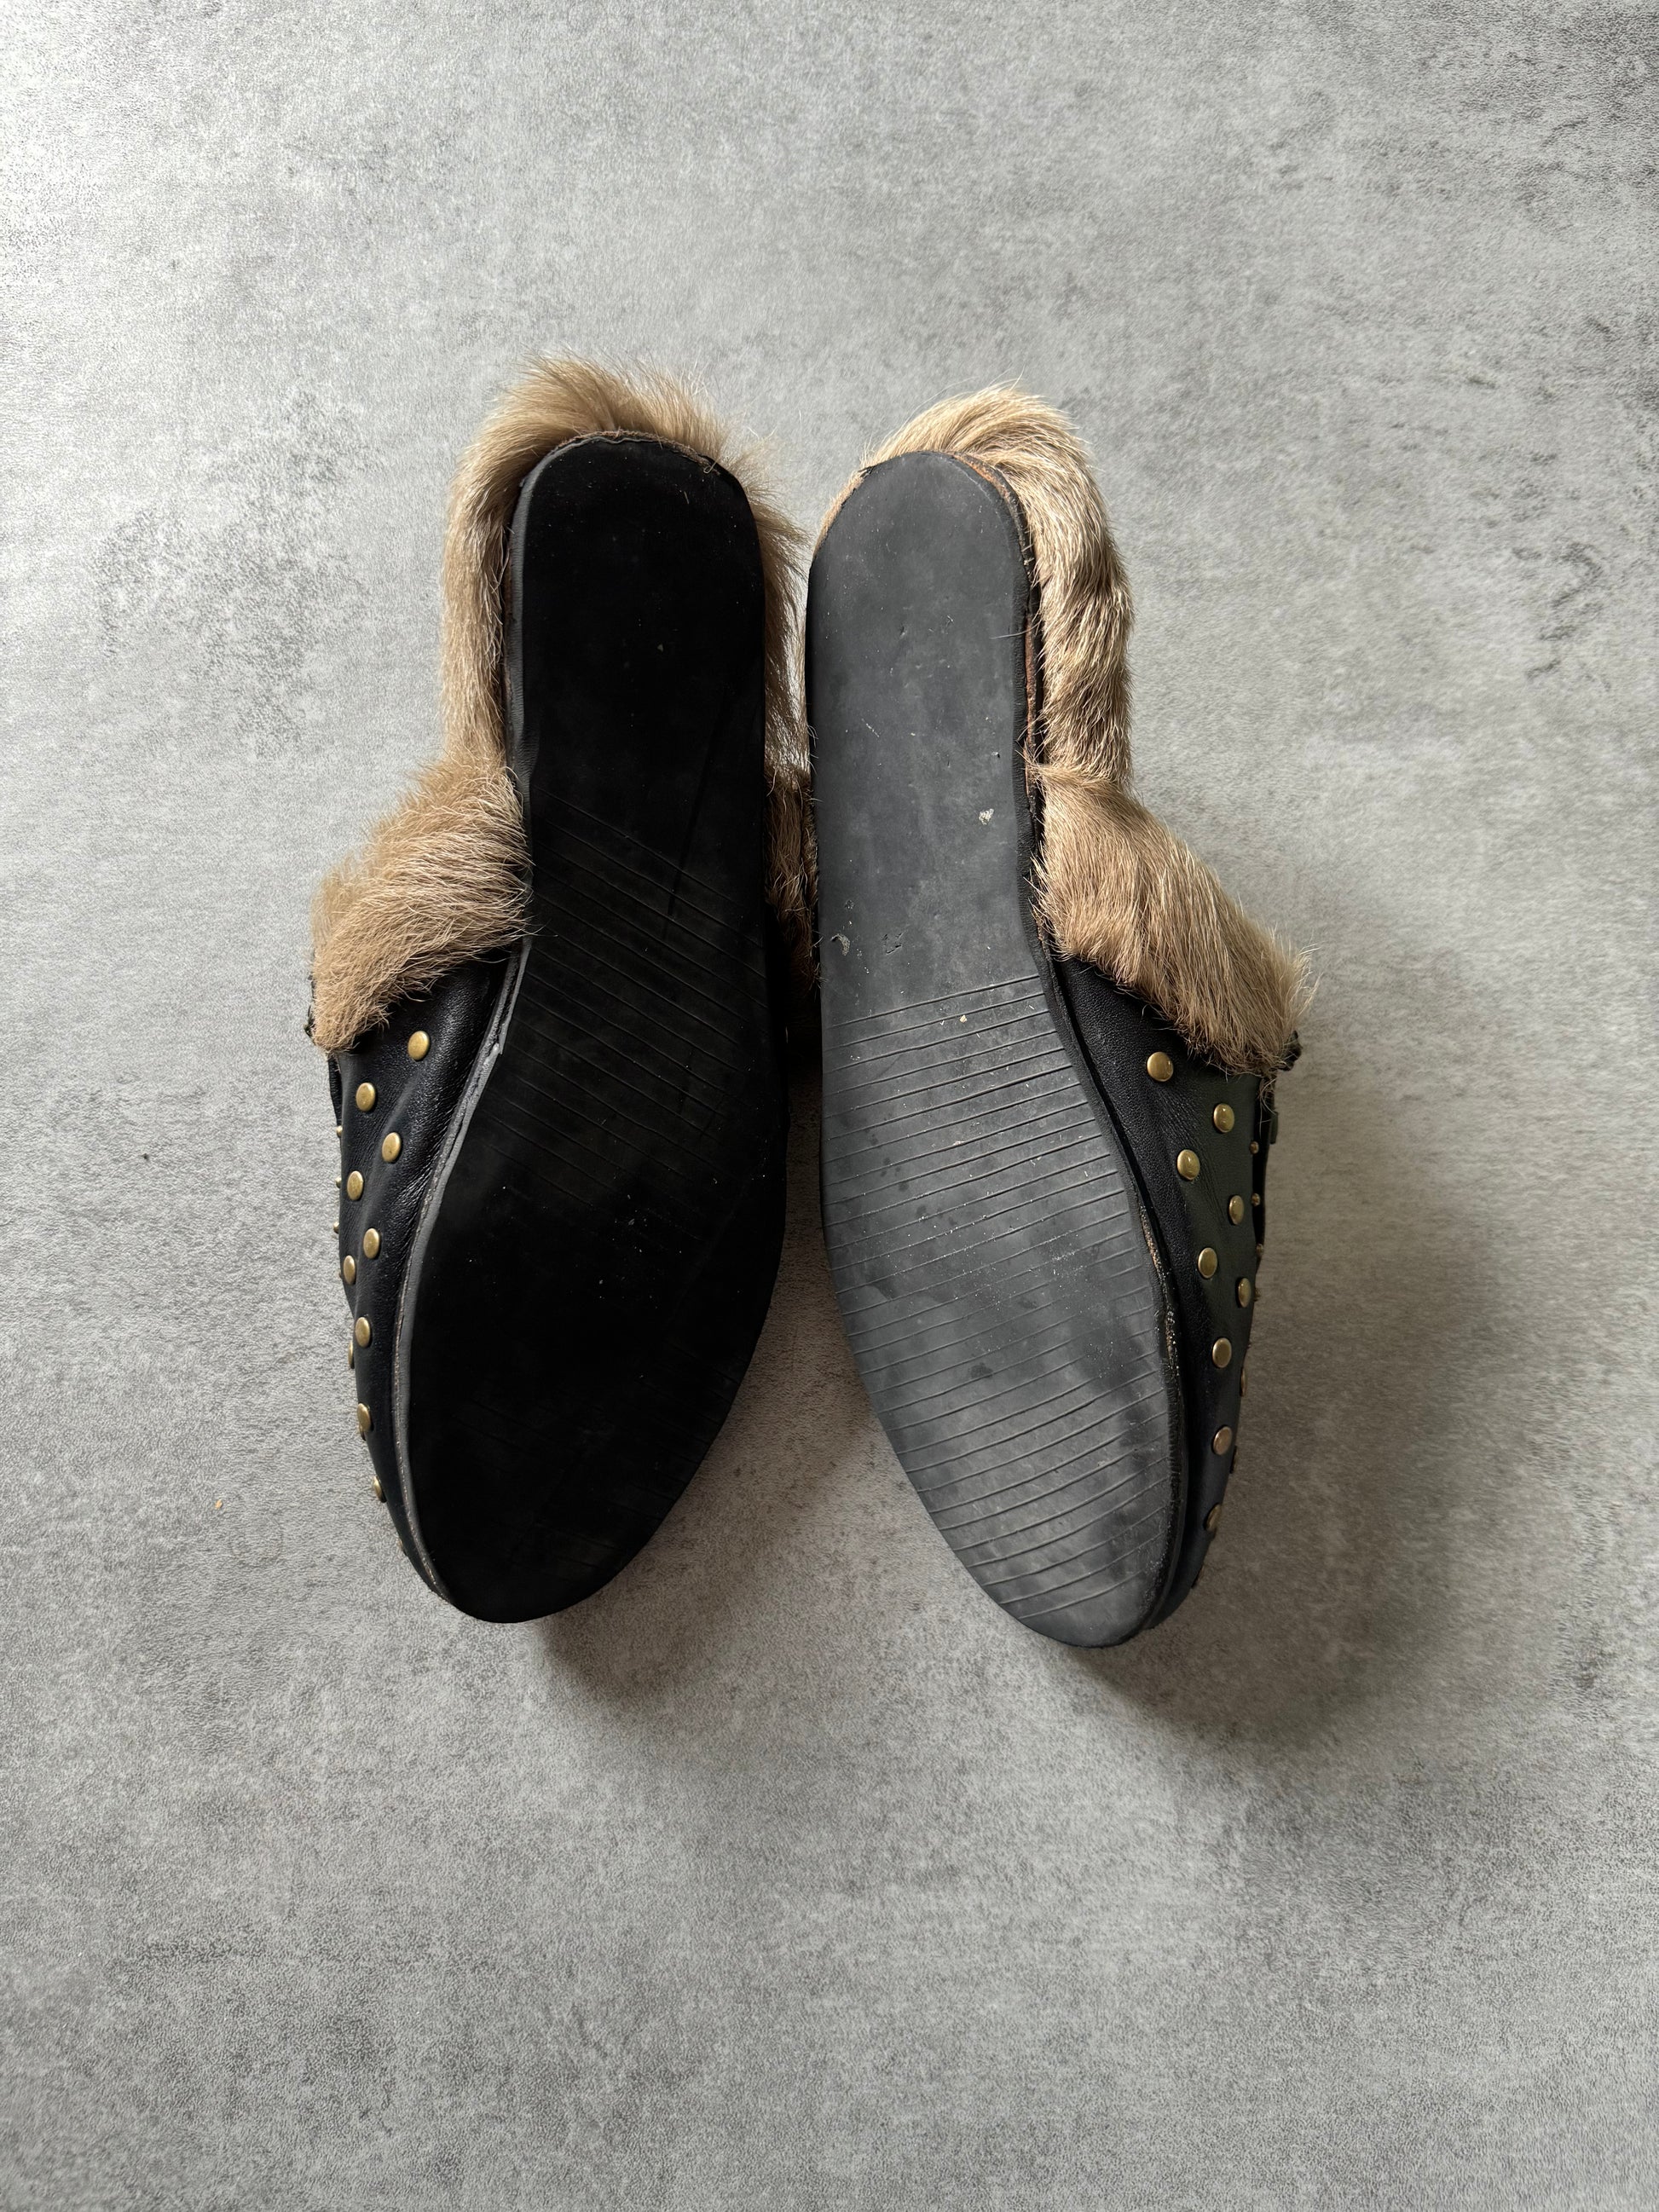 Gucci Princetown Studded Leather Fur Mules (38) - 6